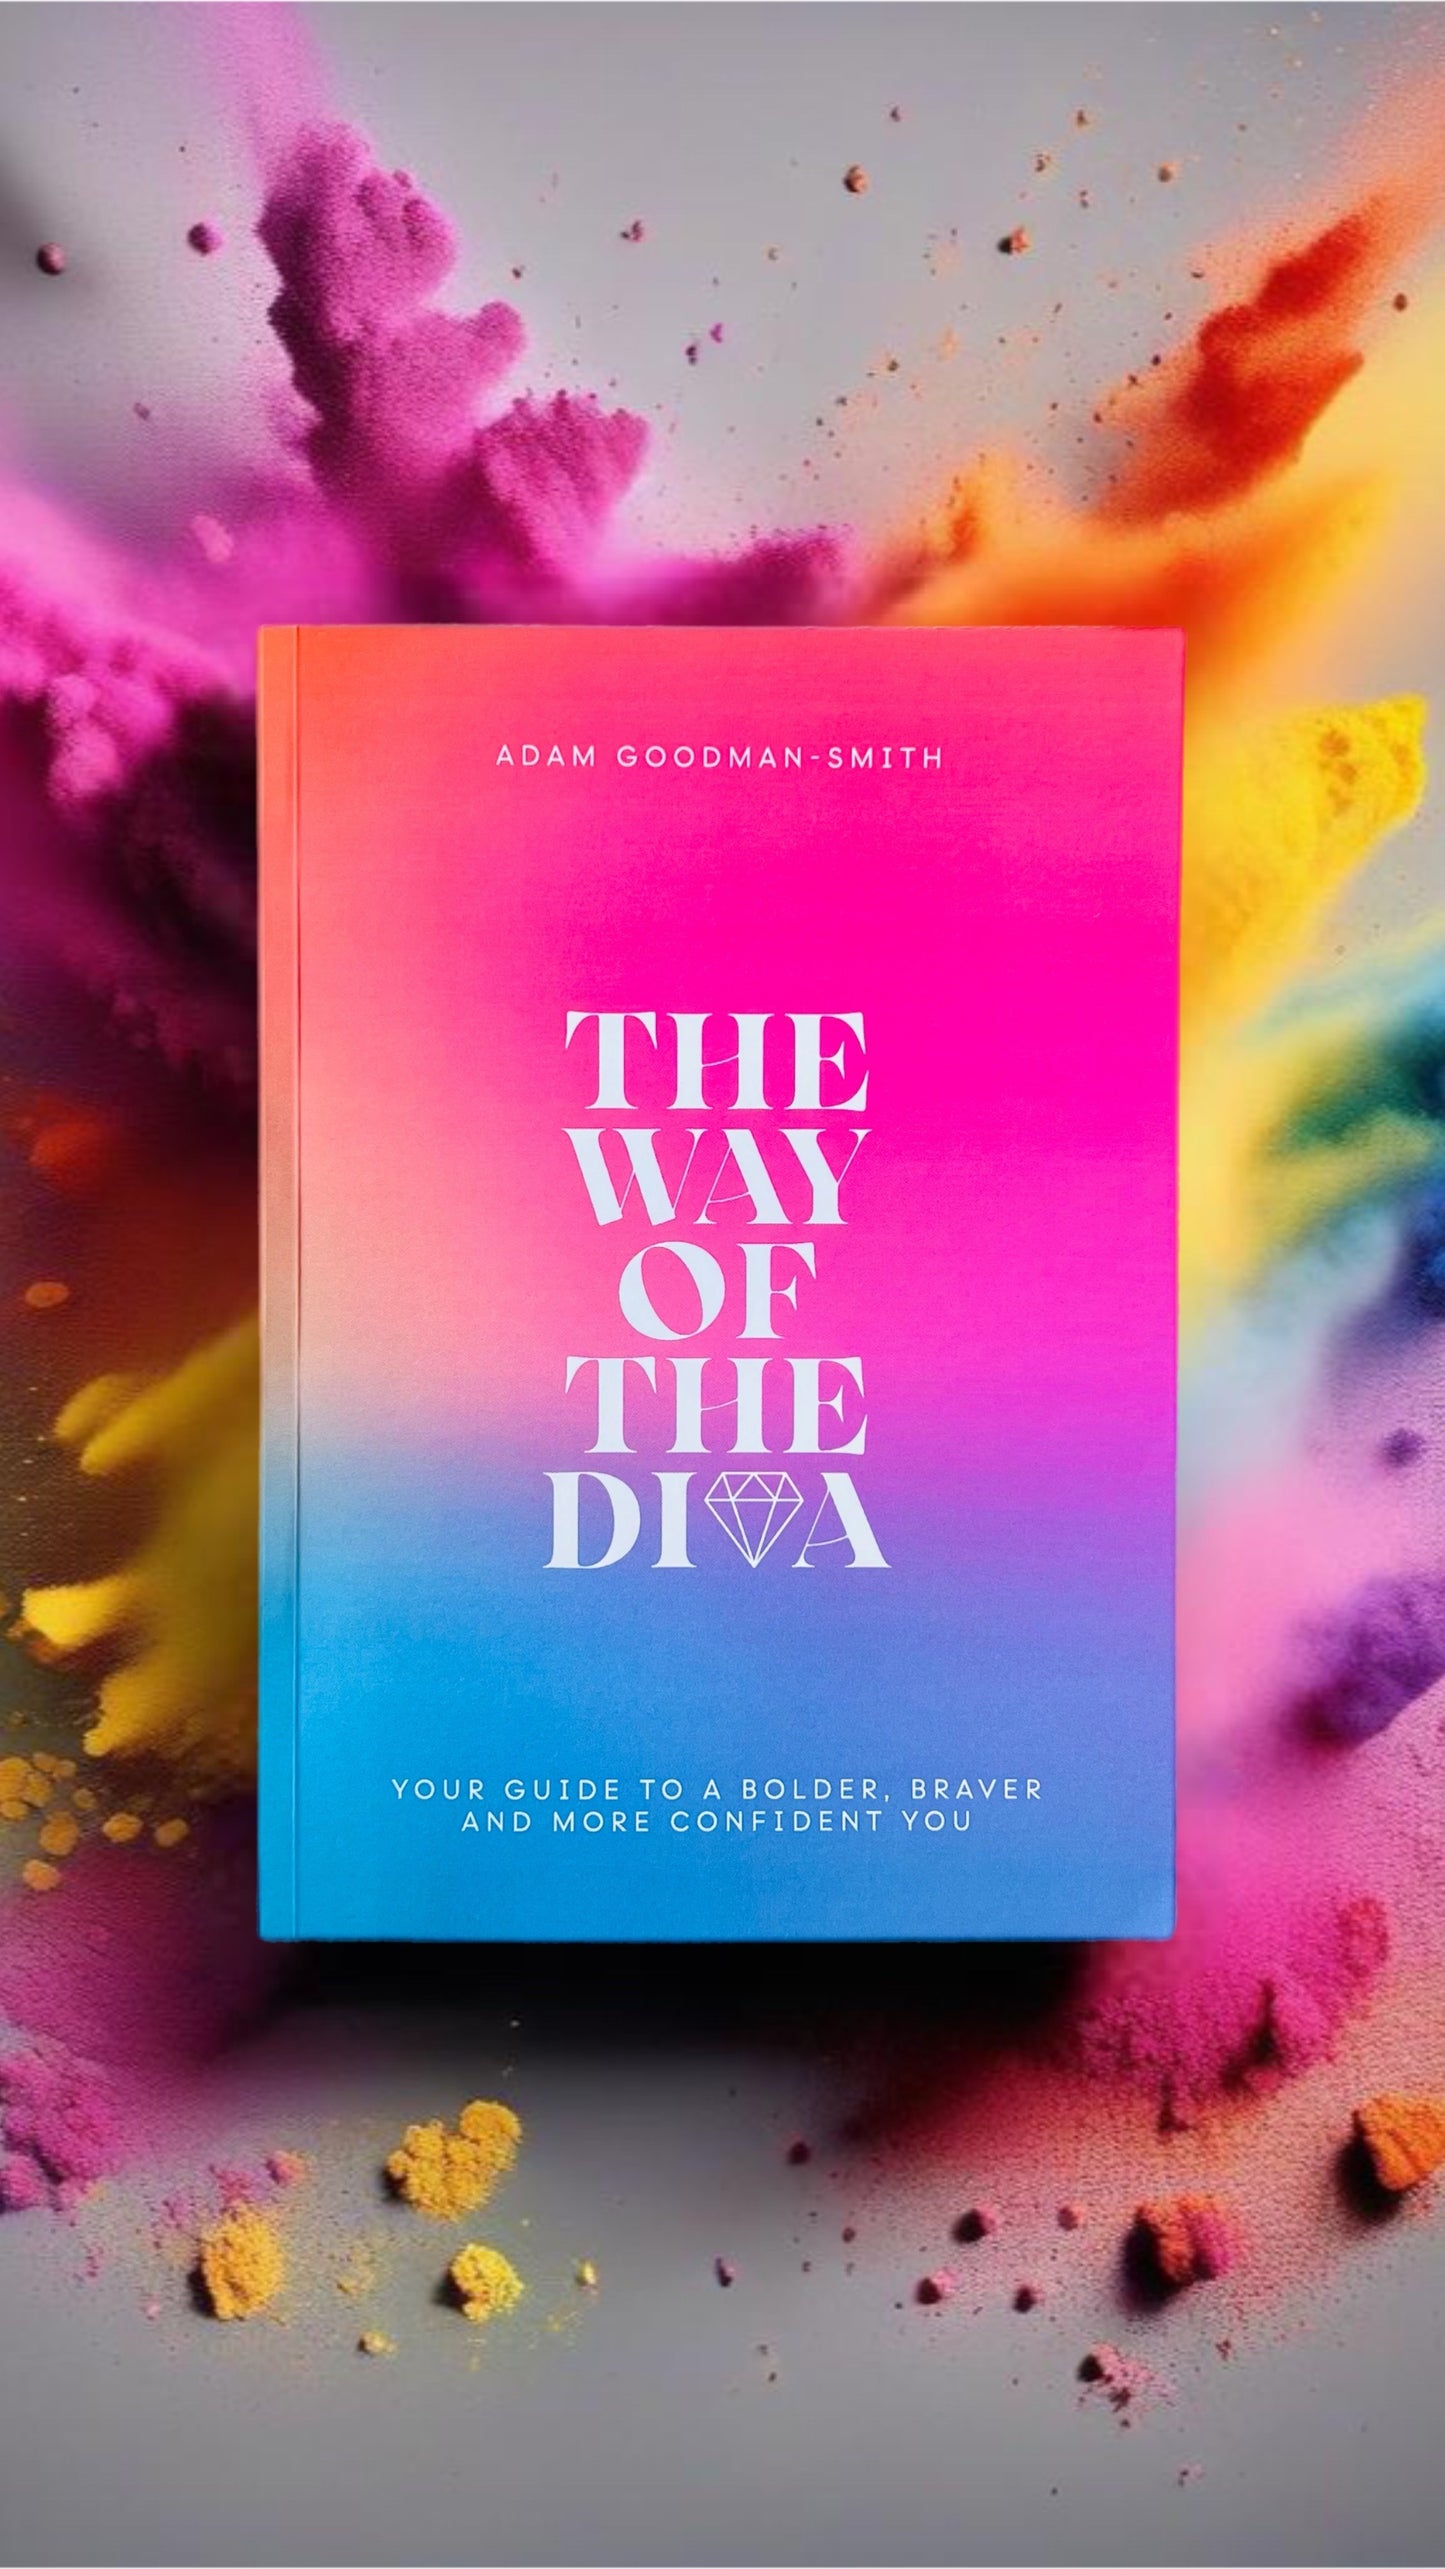 The Way of The Diva: Your Guide to a Bolder, Braver and More Confident You